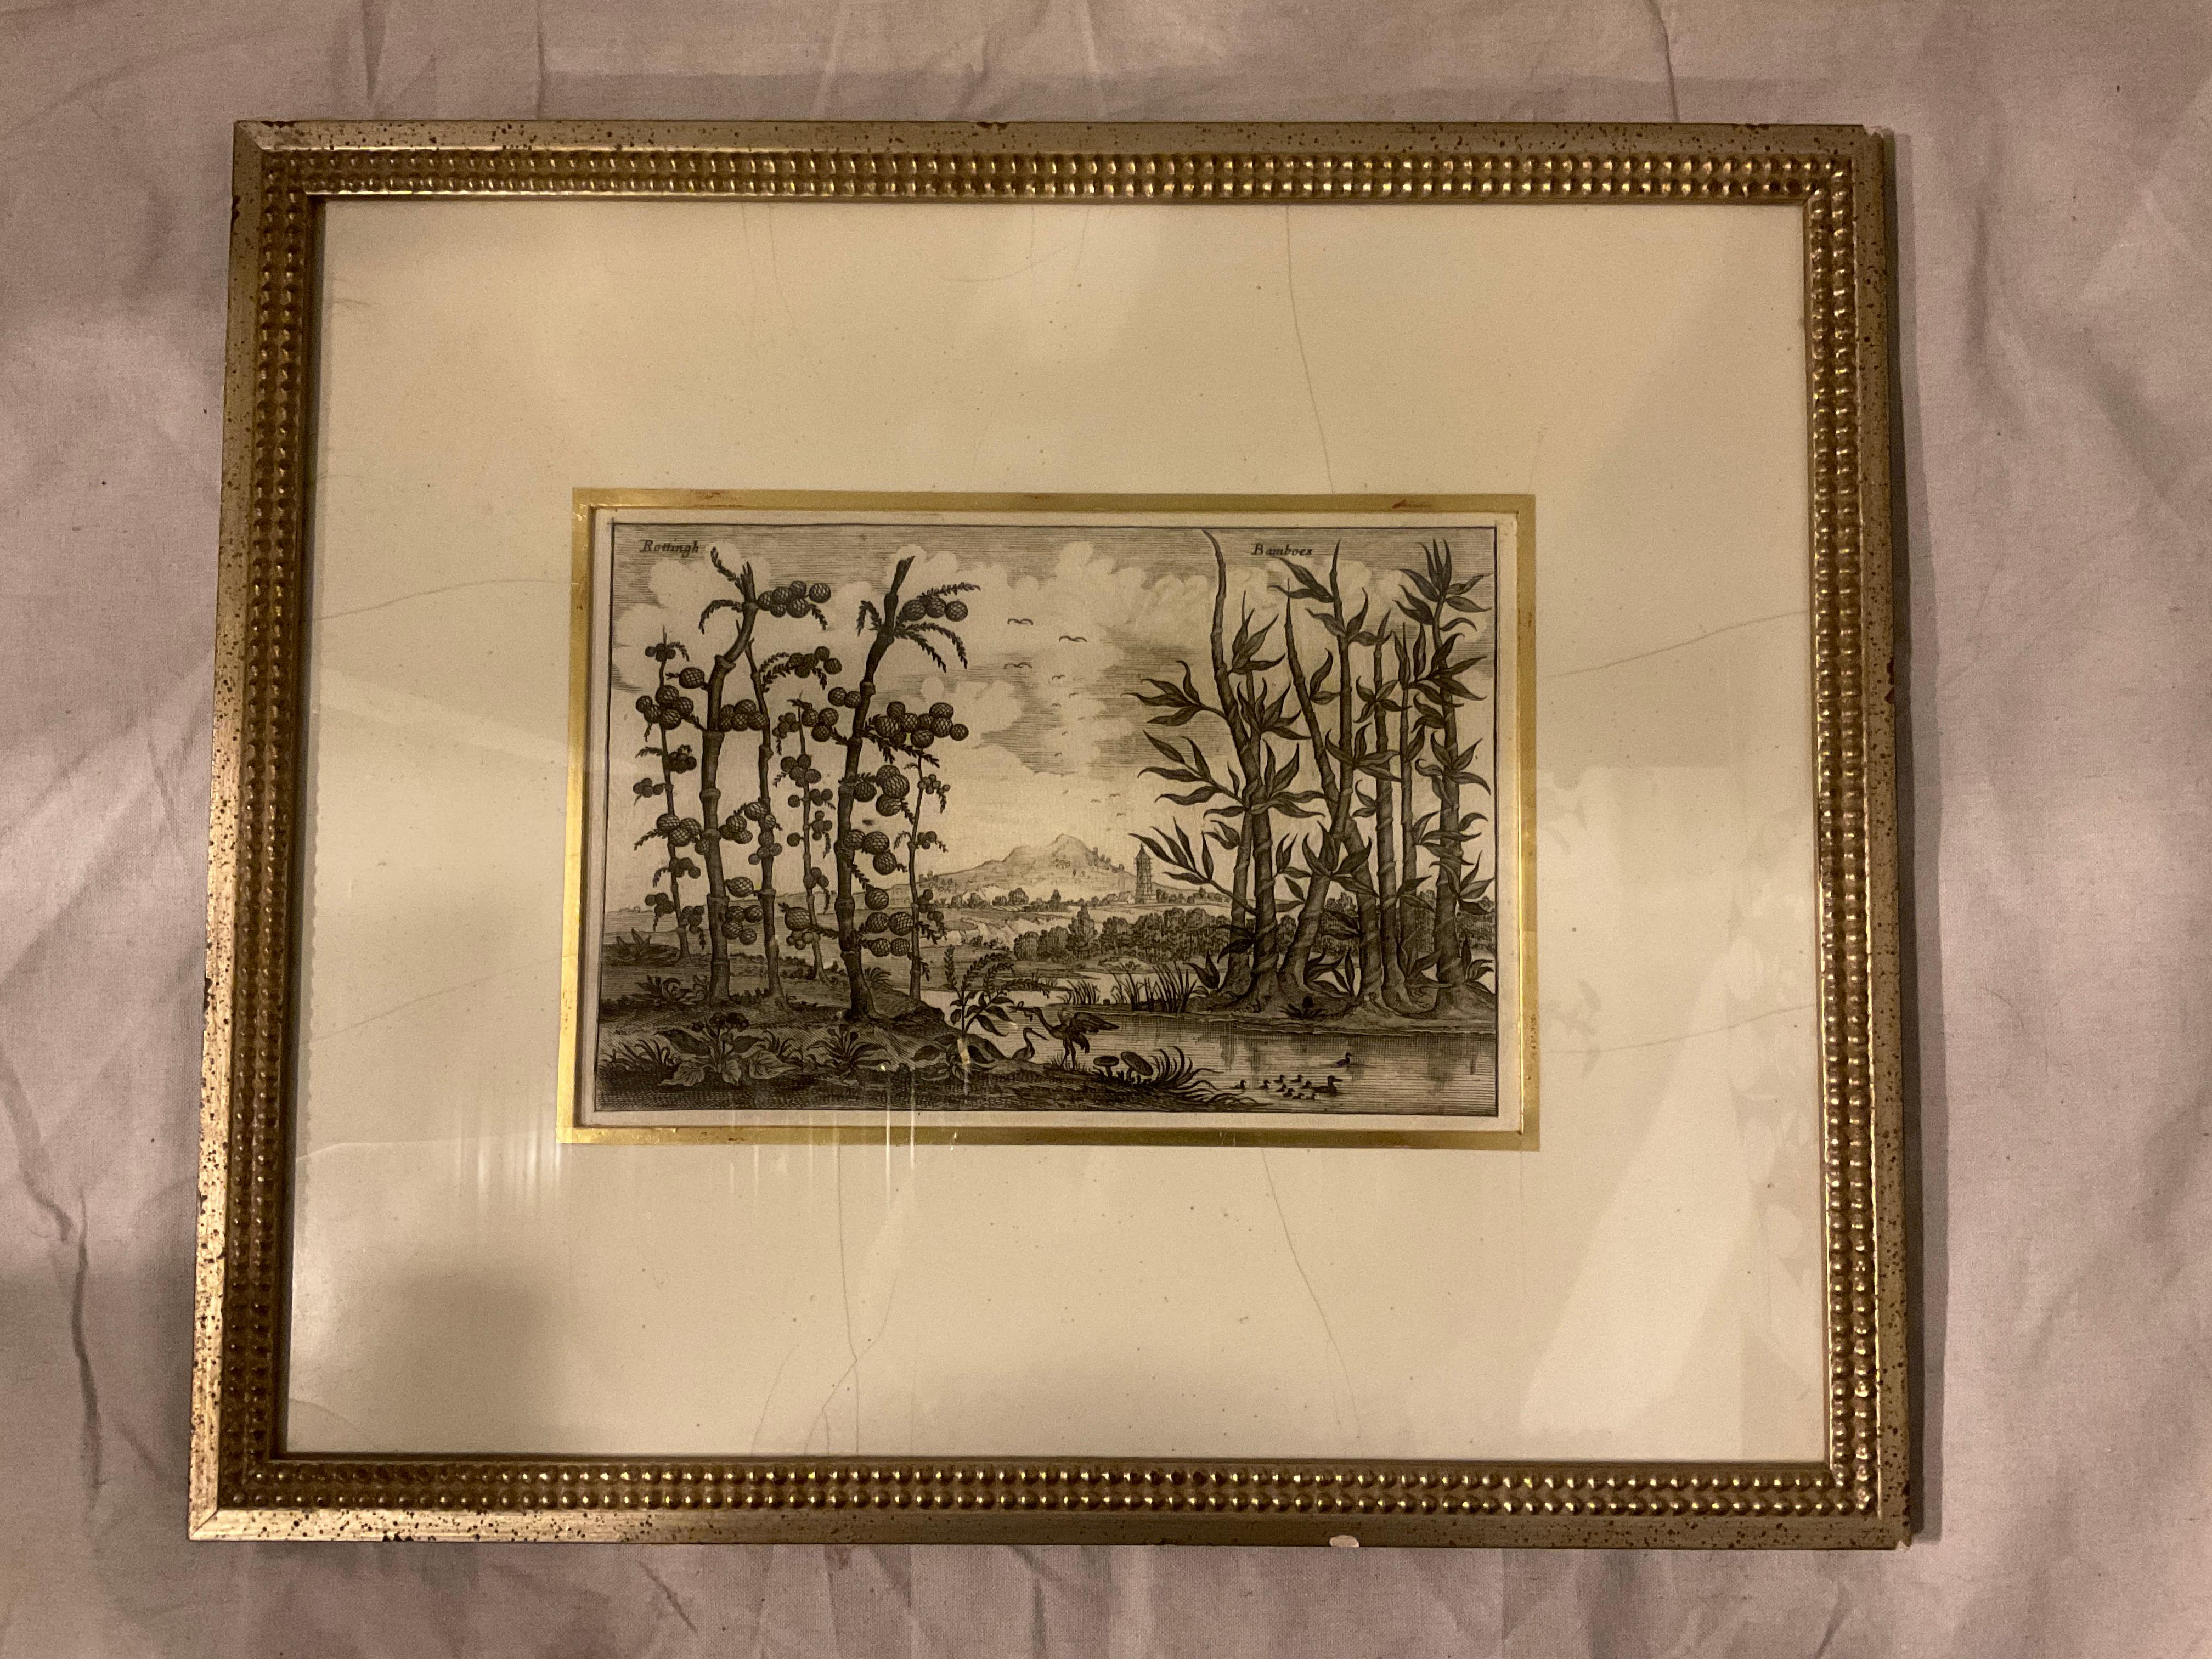 6 Soicher- Marin Tropical Landscape From Asia Prints In Silver Leaf Frames For Sale 3